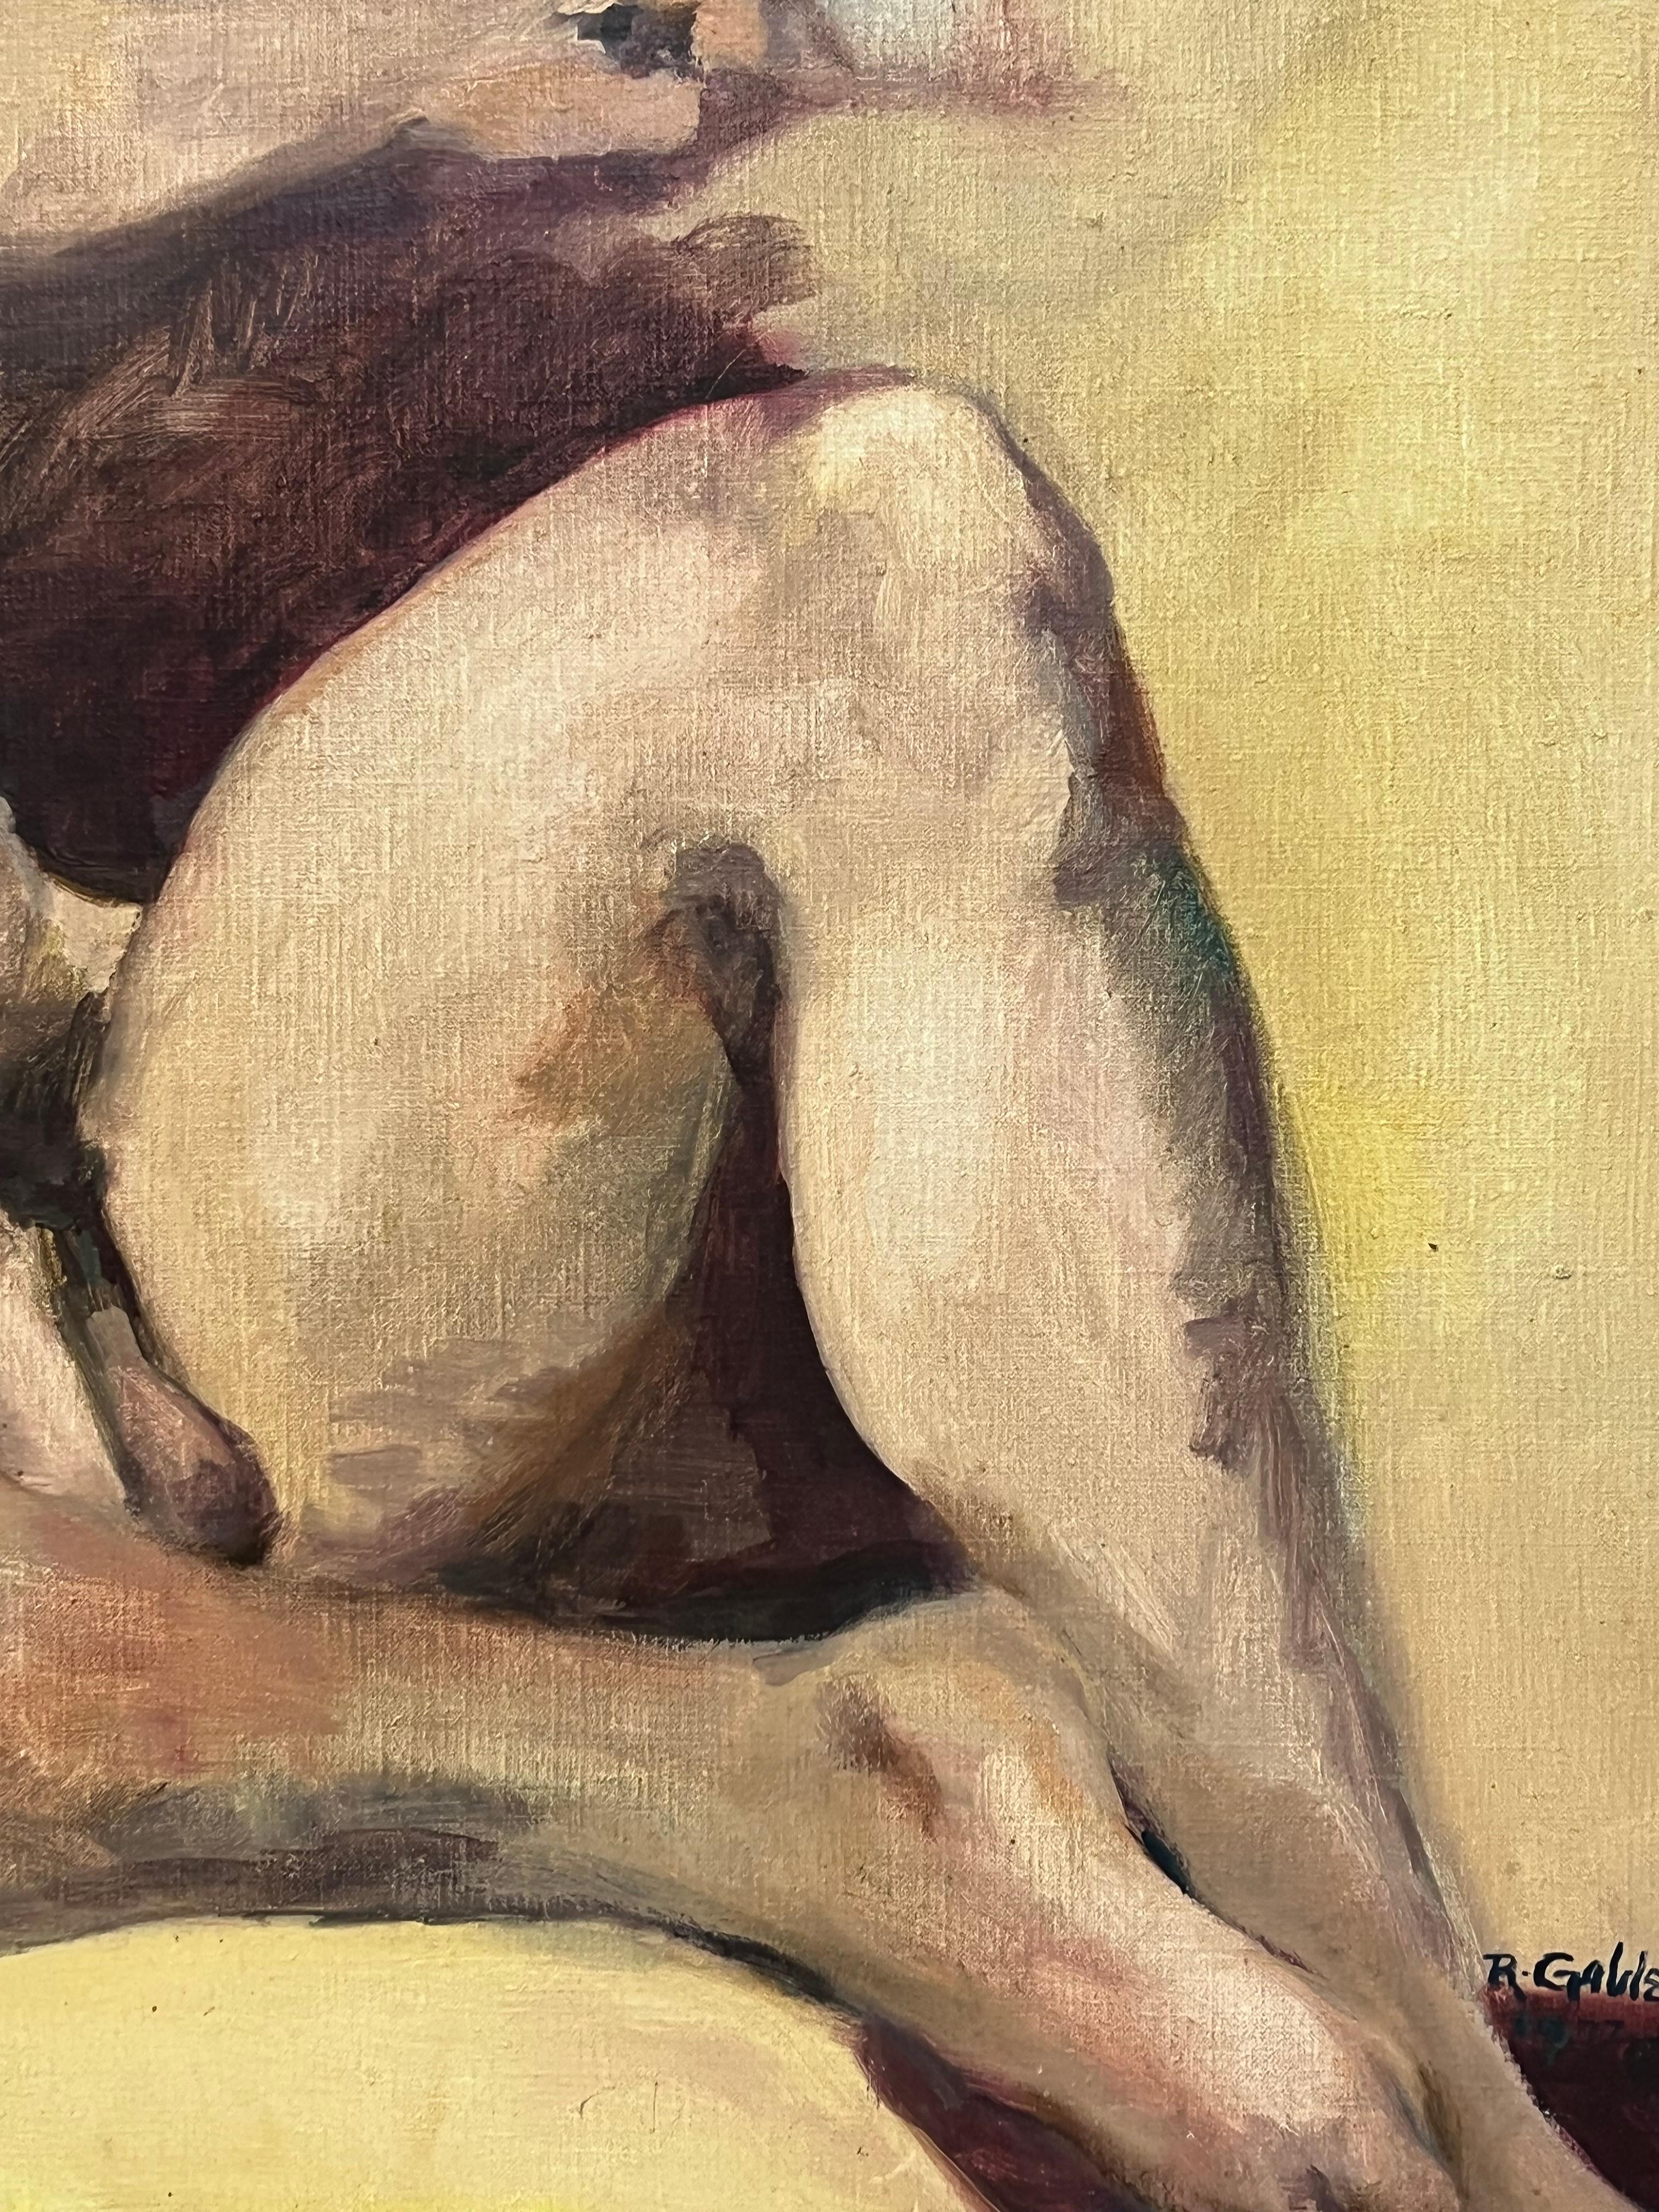 Hand-Painted Large Vintage 1970s Robert Gable Male Nude Study Oil Painting For Sale